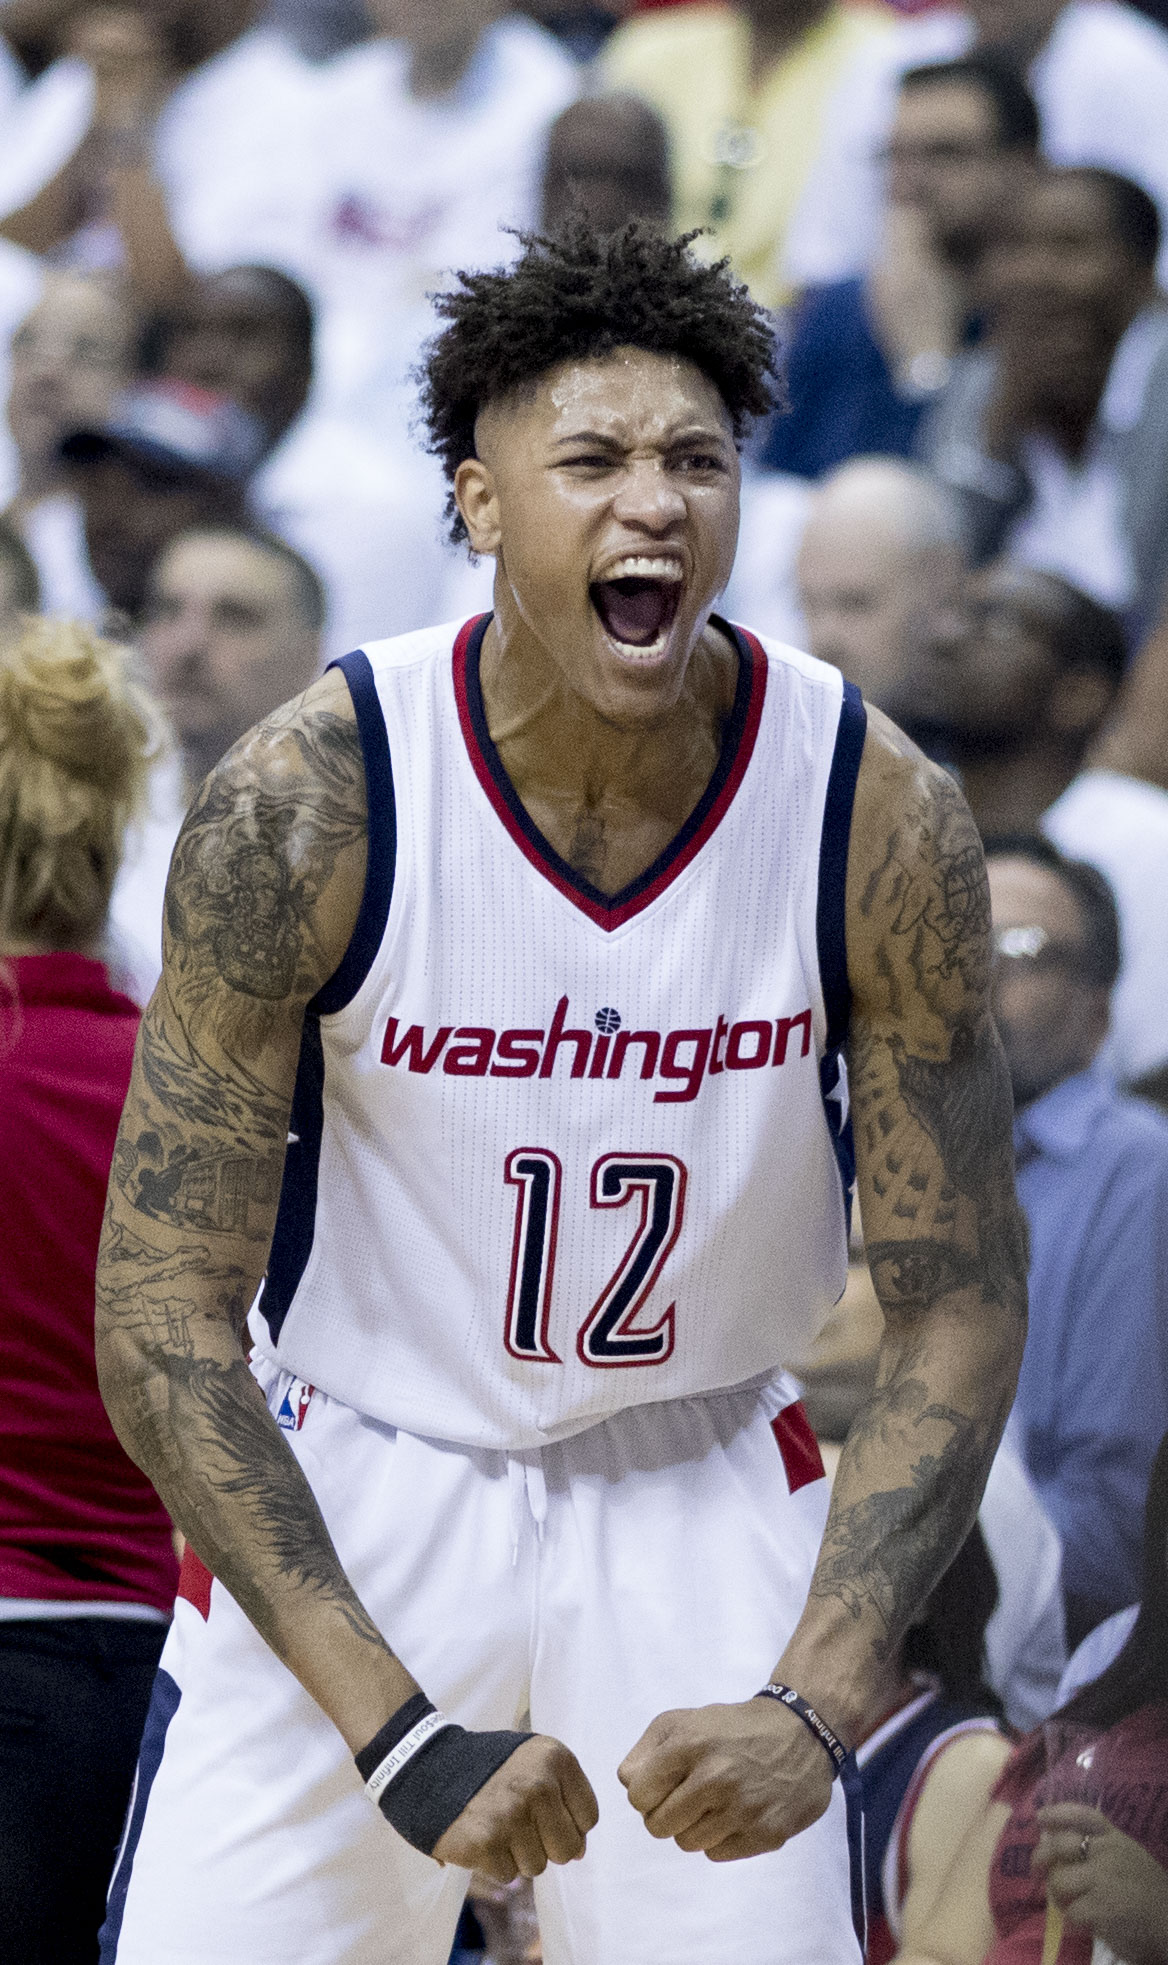 Kelly Oubre (Wiki) Kelly Oubre’s Age, Family, Education Net Worth and